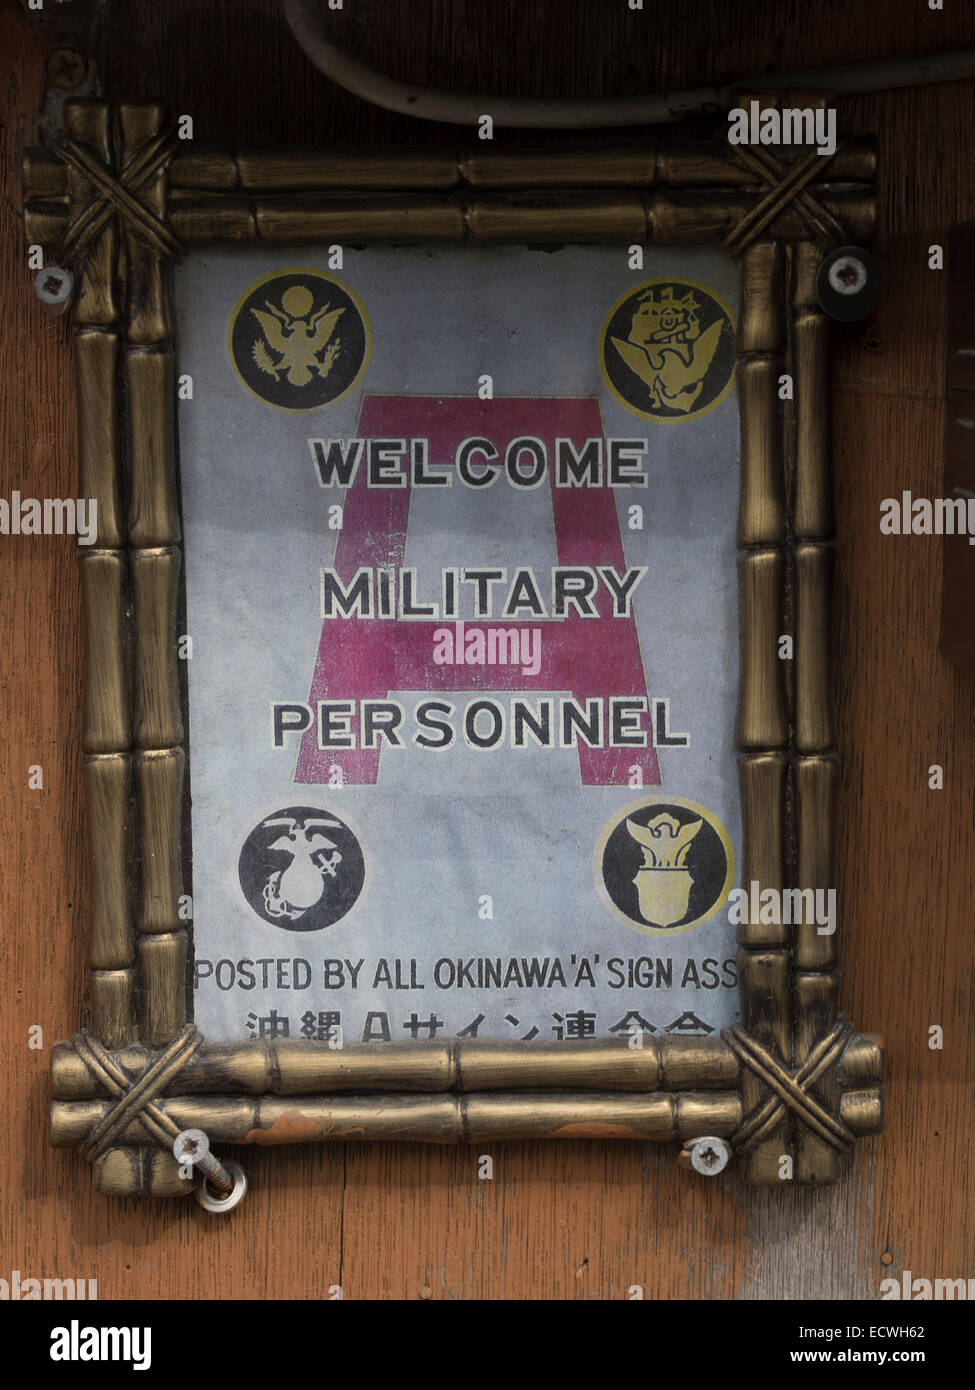 Signs outside a bar in Naha City Okinawa, allowing patronage by U.S. military. Stock Photo